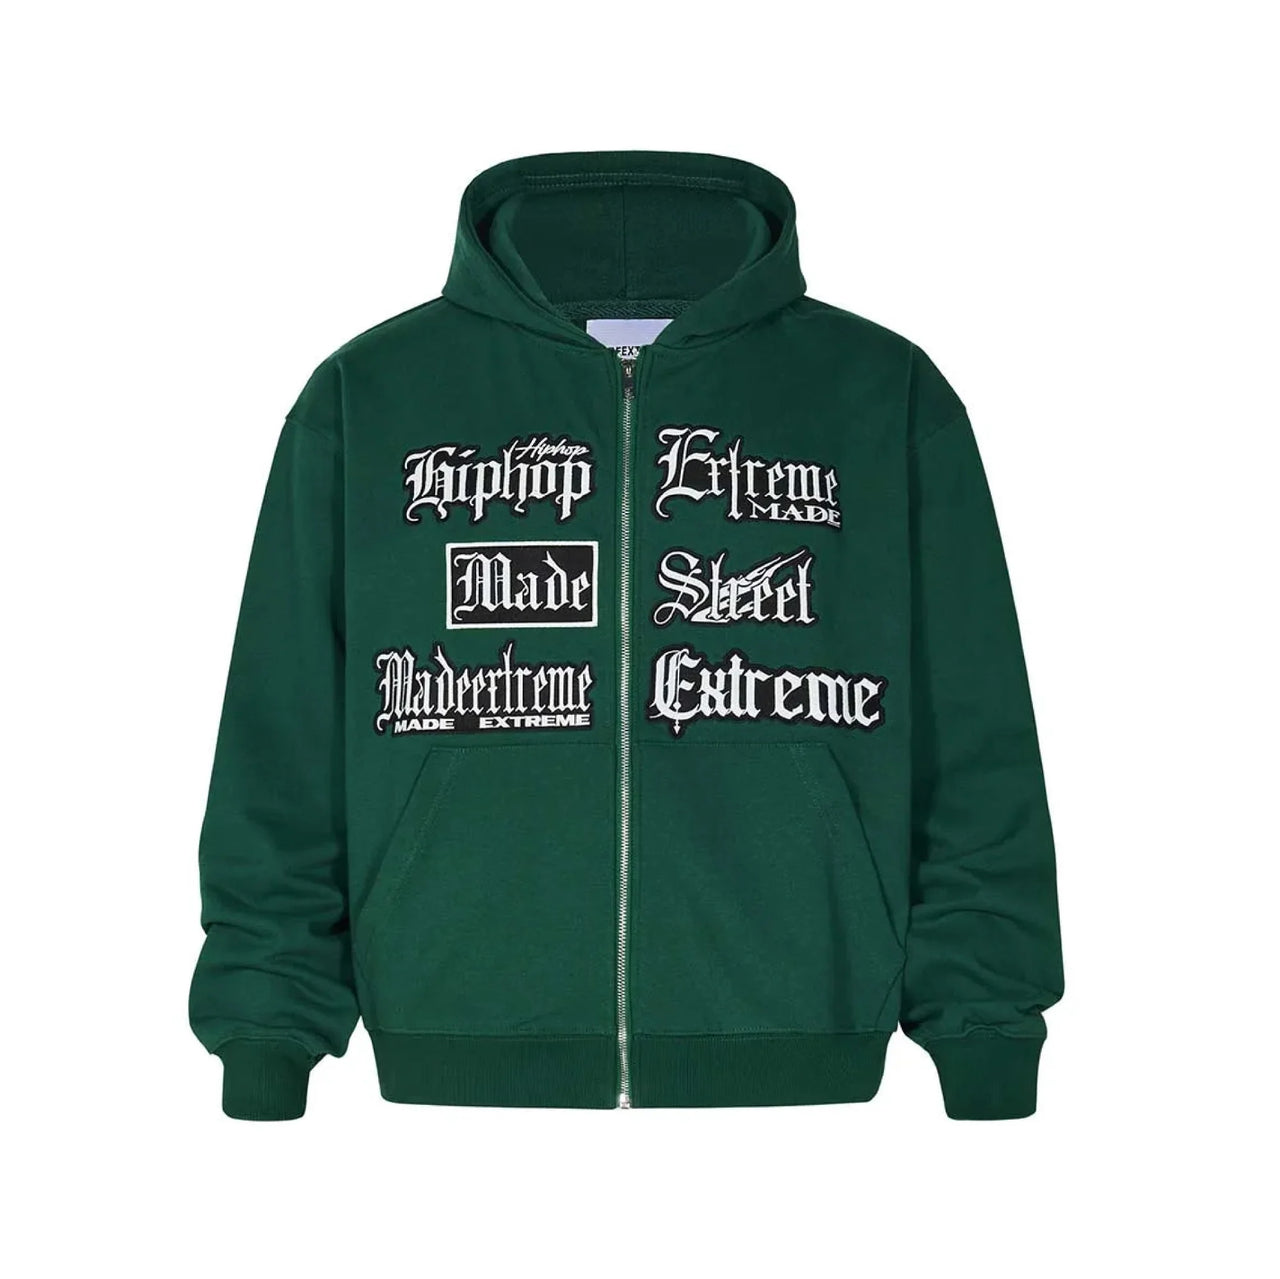 MADE EXTREME Multi Gothic Logo Zip Up Hoodie